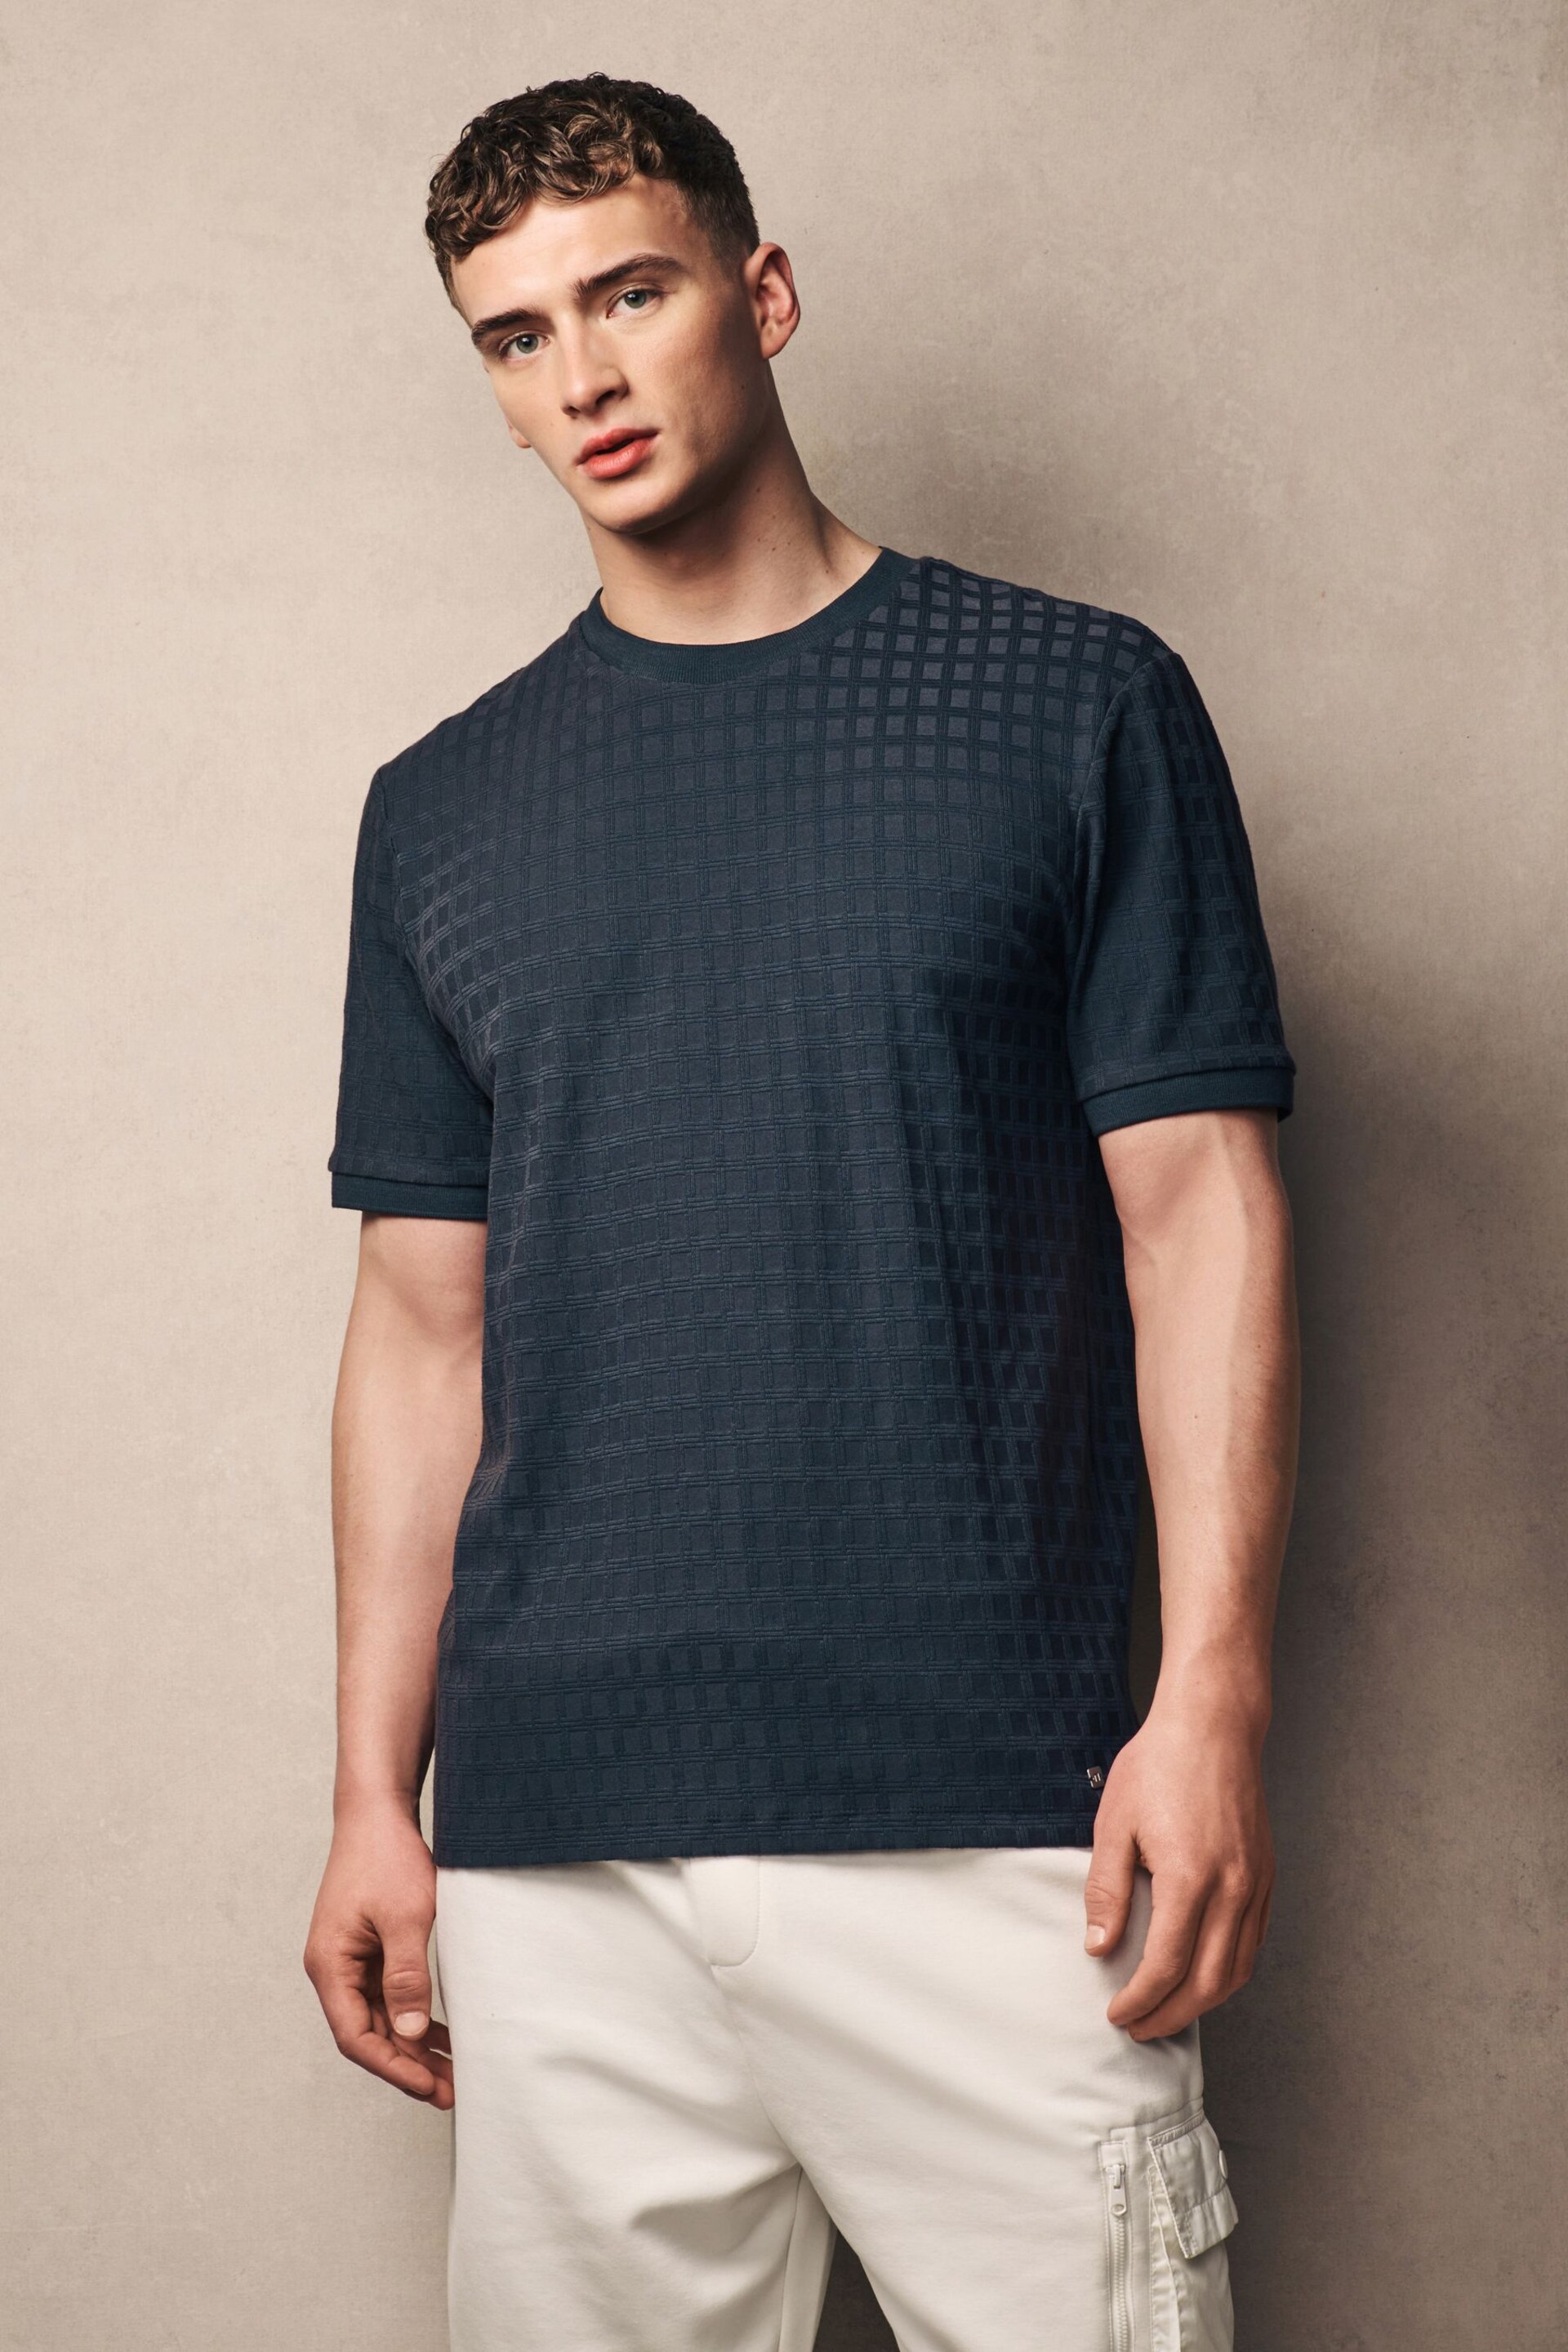 Charcoal Grey Texture T-Shirt - Image 3 of 8